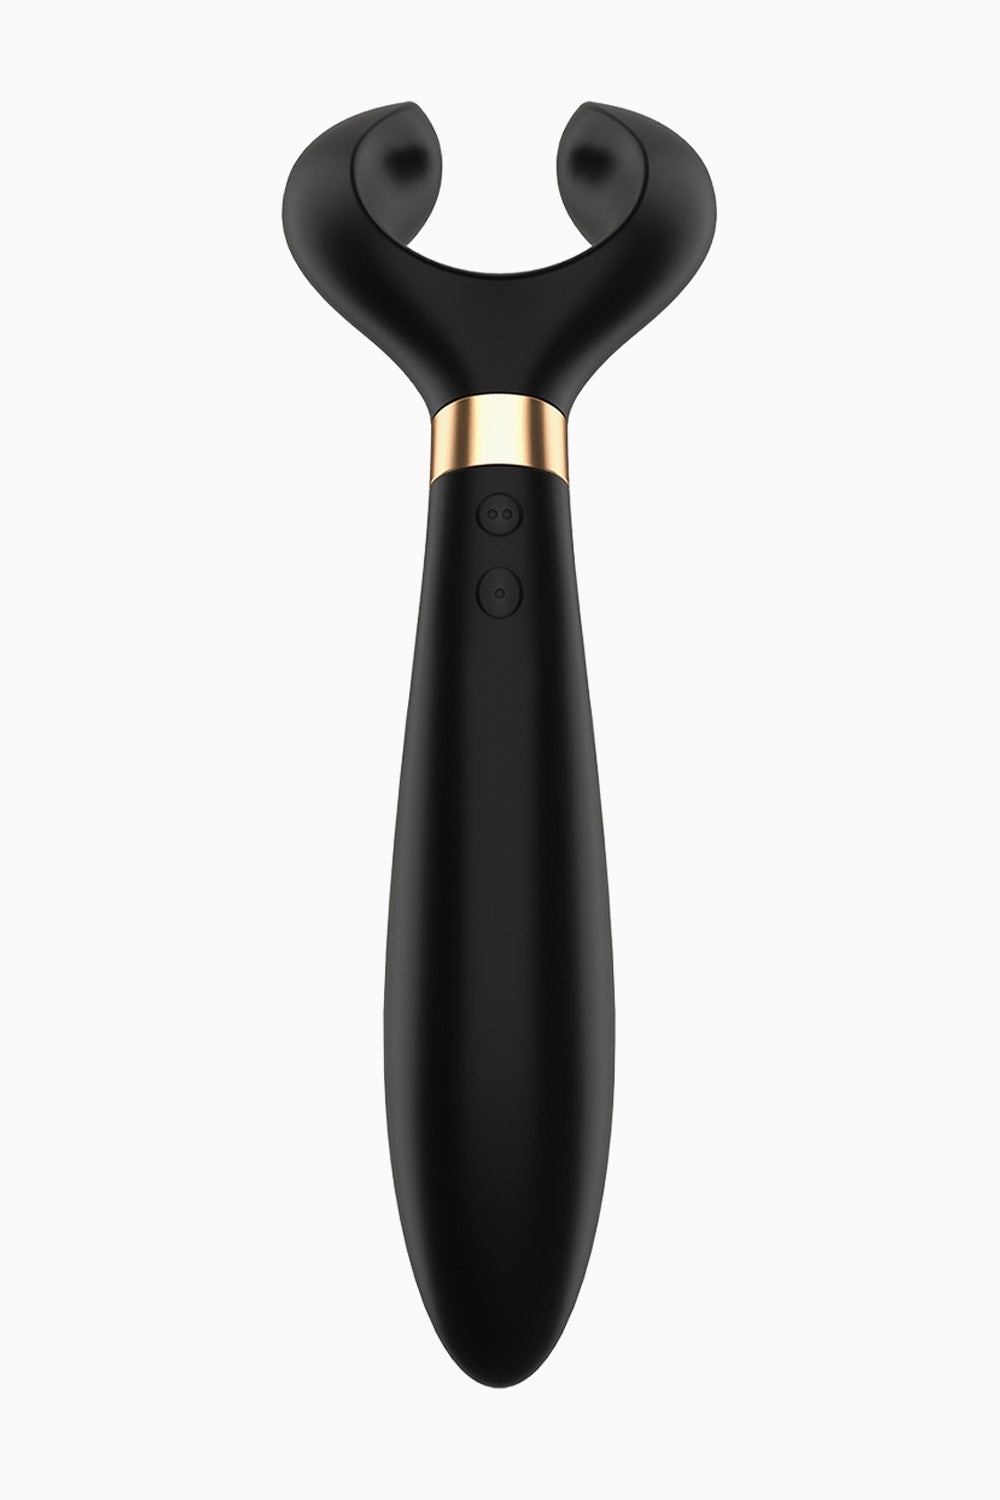 Satisfyer Endless Fun Rechargeable Multi Vibrator Black, 7.5 Inches